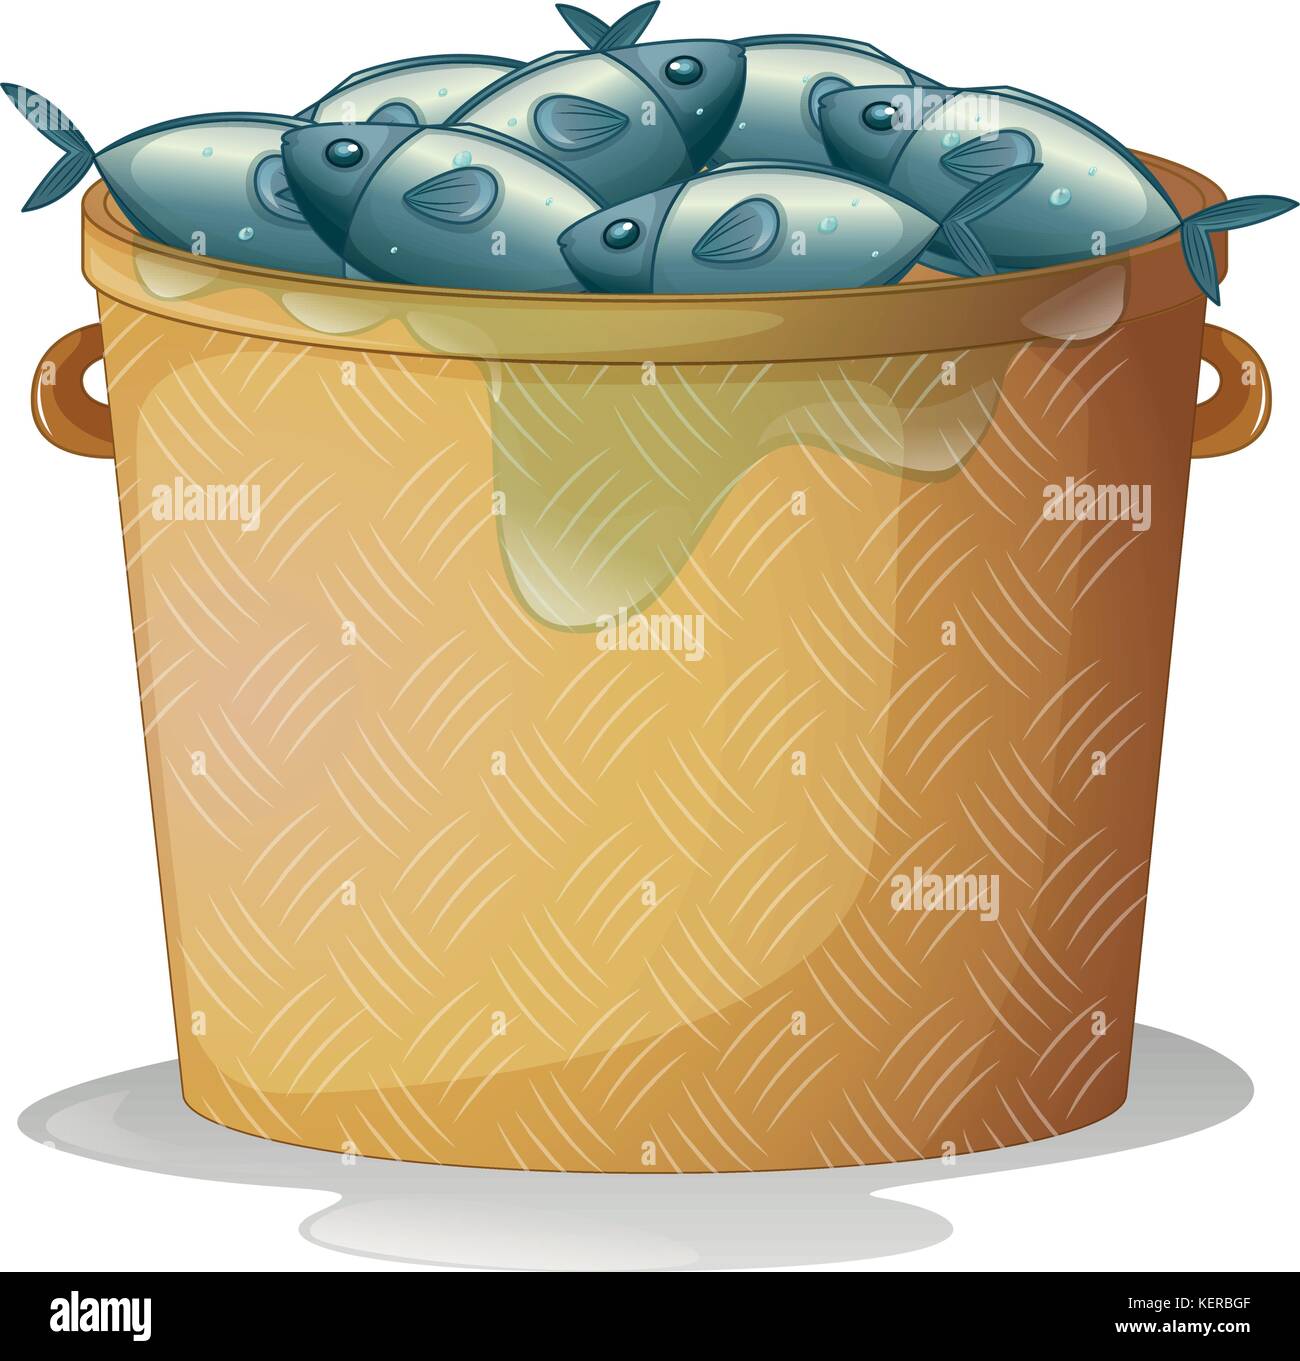 Illustration of a bucket of fish on a white background Stock